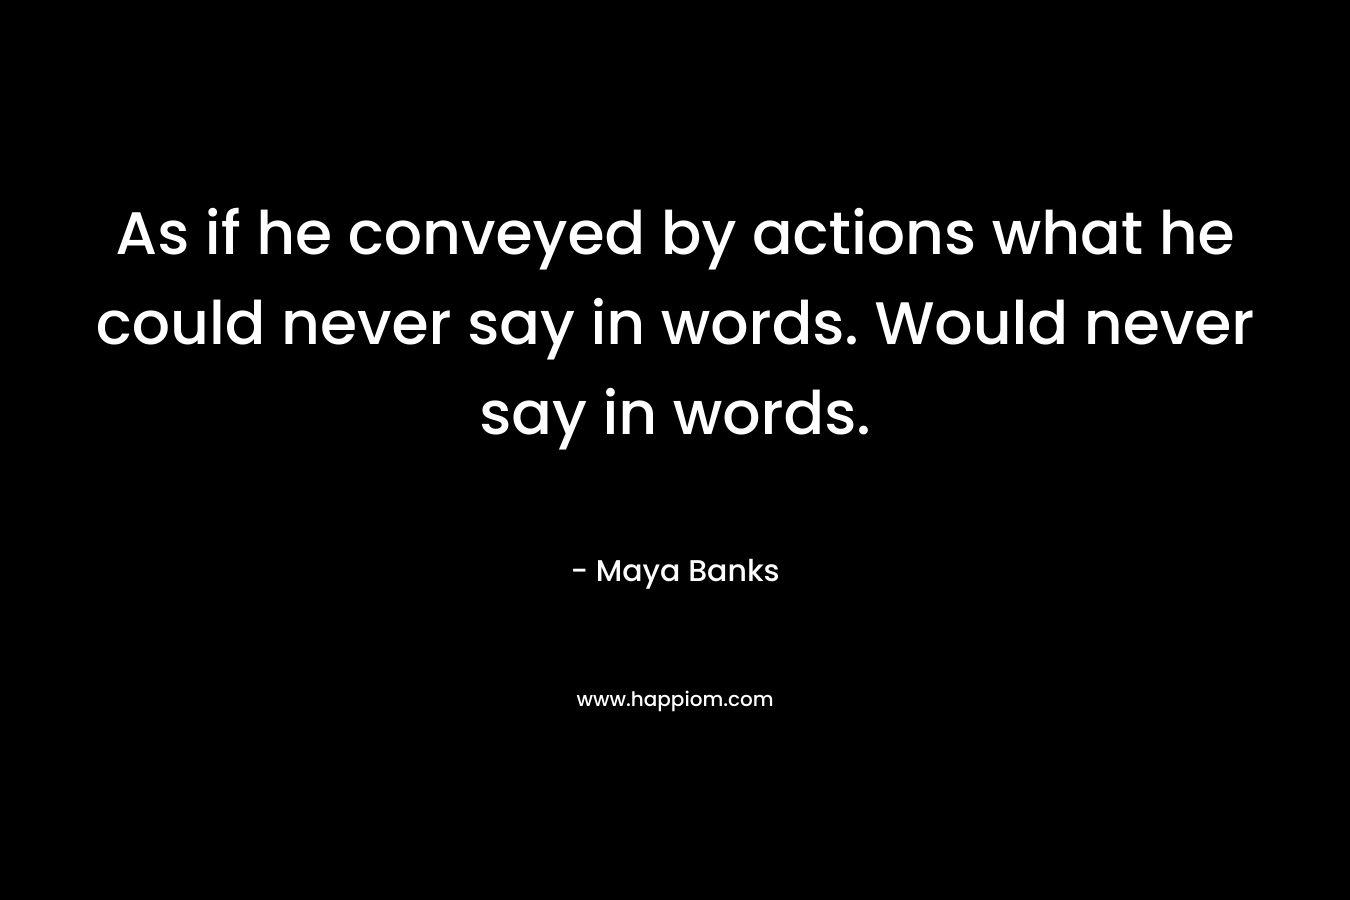 As if he conveyed by actions what he could never say in words. Would never say in words.